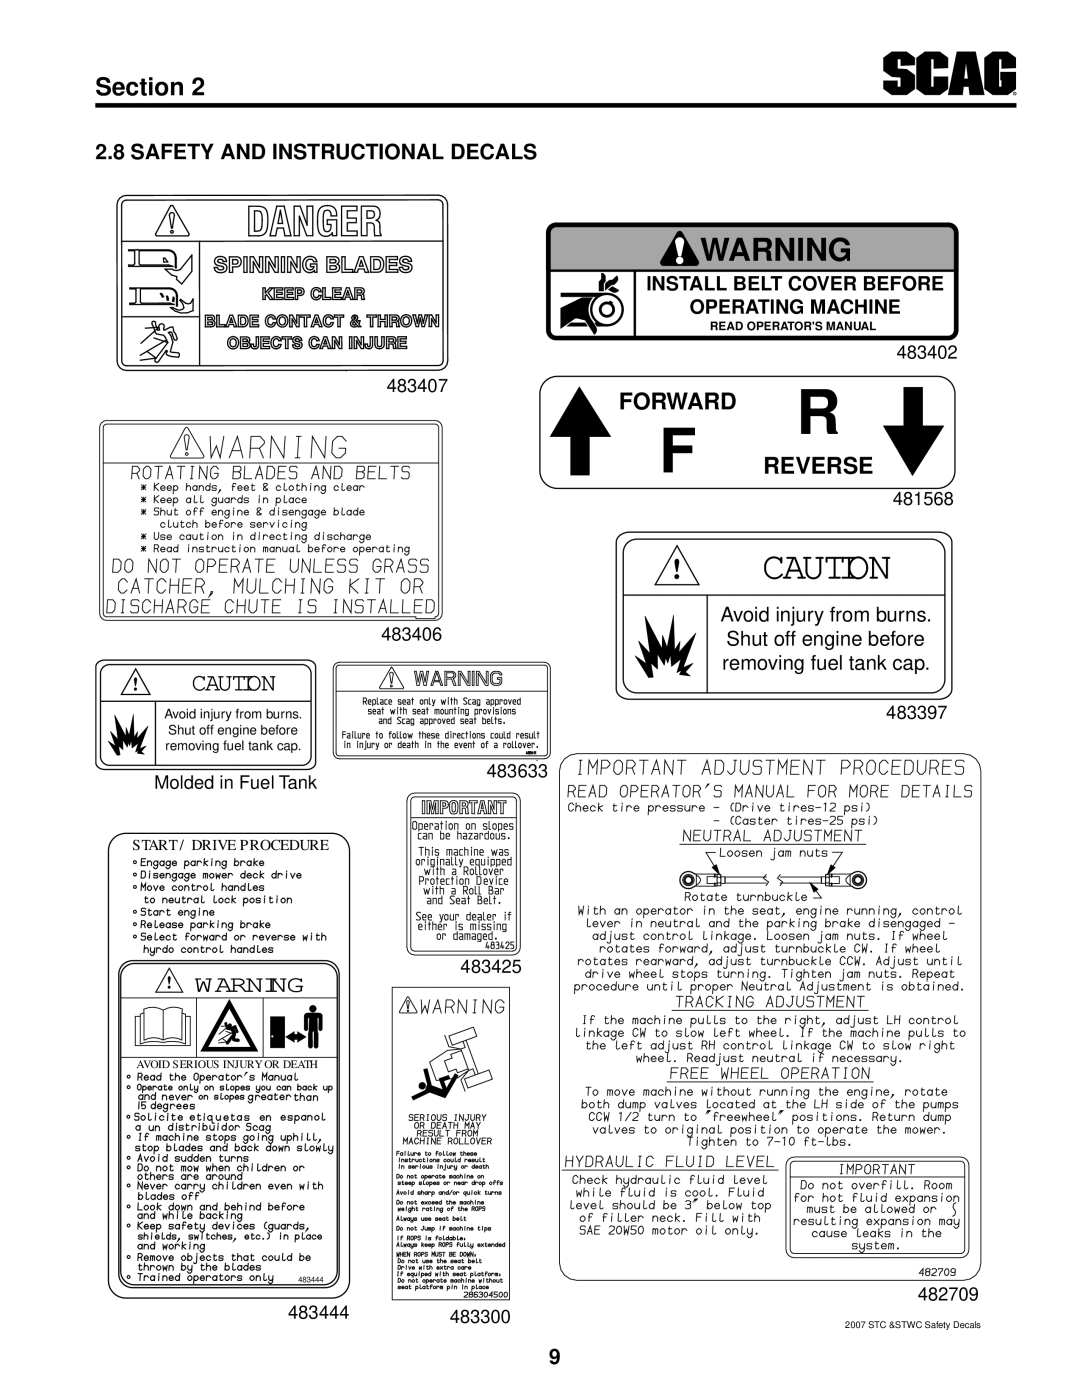 Scag Power Equipment STWC48V-25CV FORWARD R F REvERSE, Safety And Instructional Decals, Section, 483407 483406, 483633 